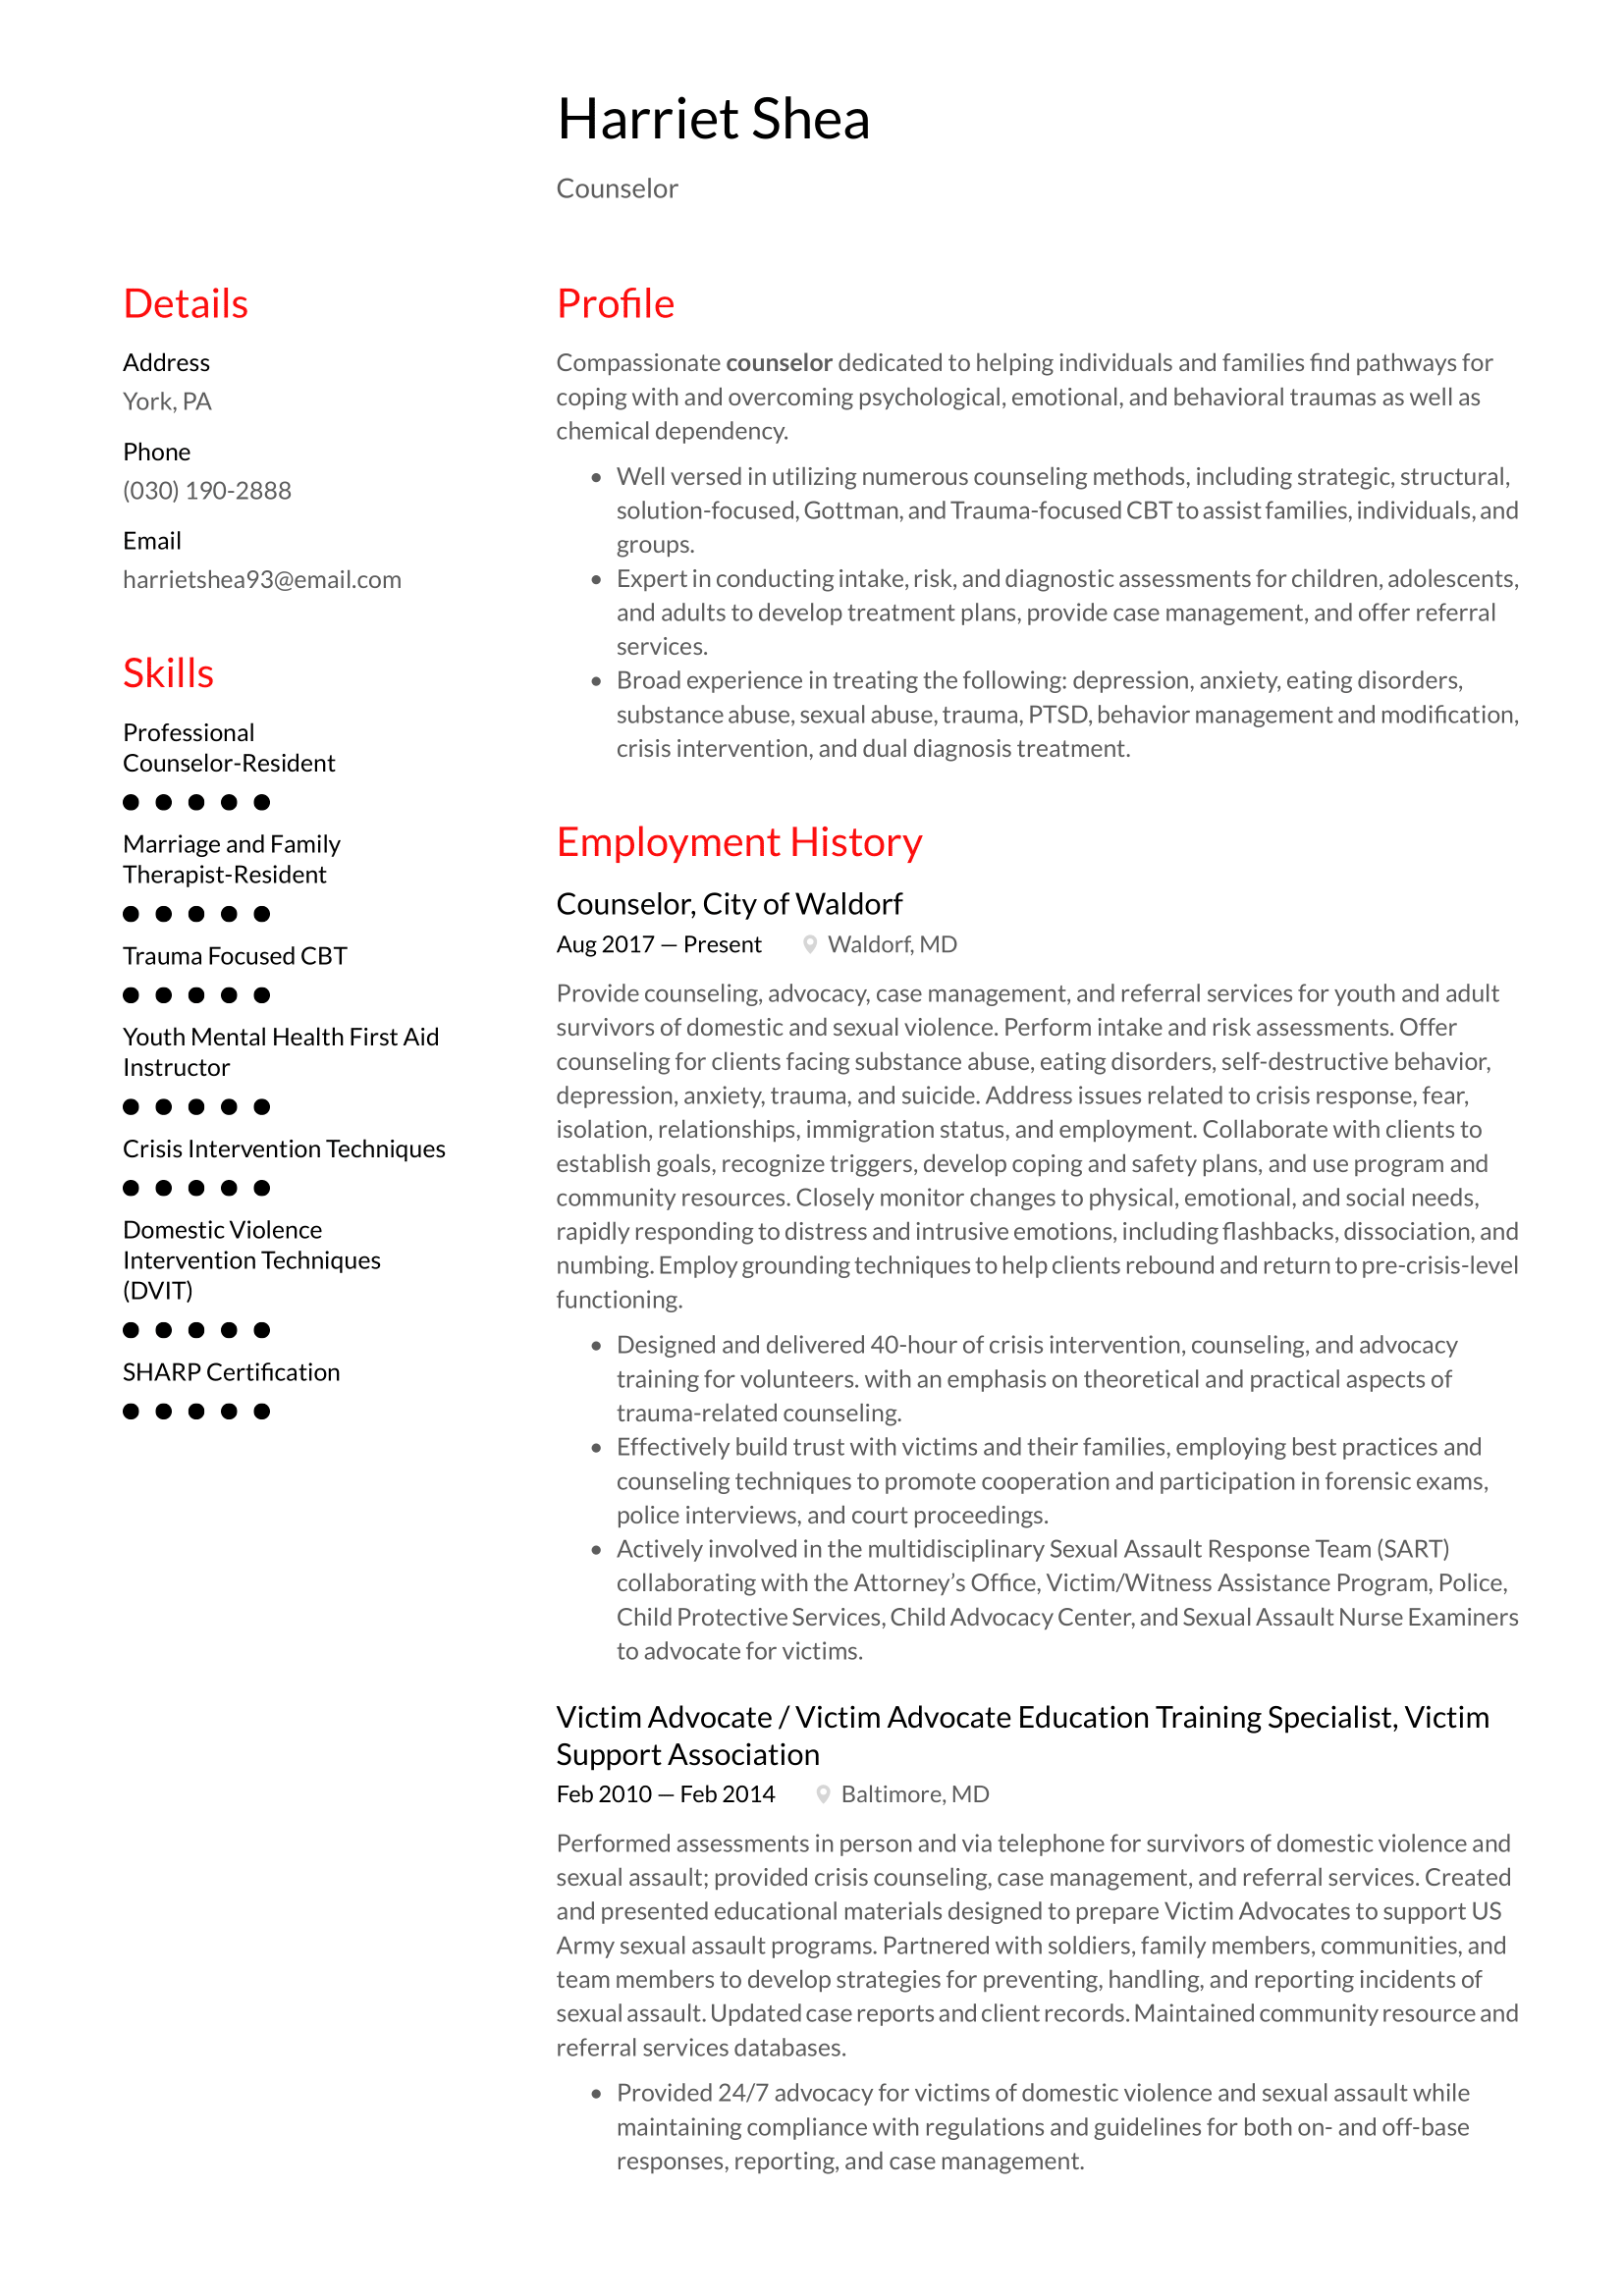 Counselor-Resume-Example.png